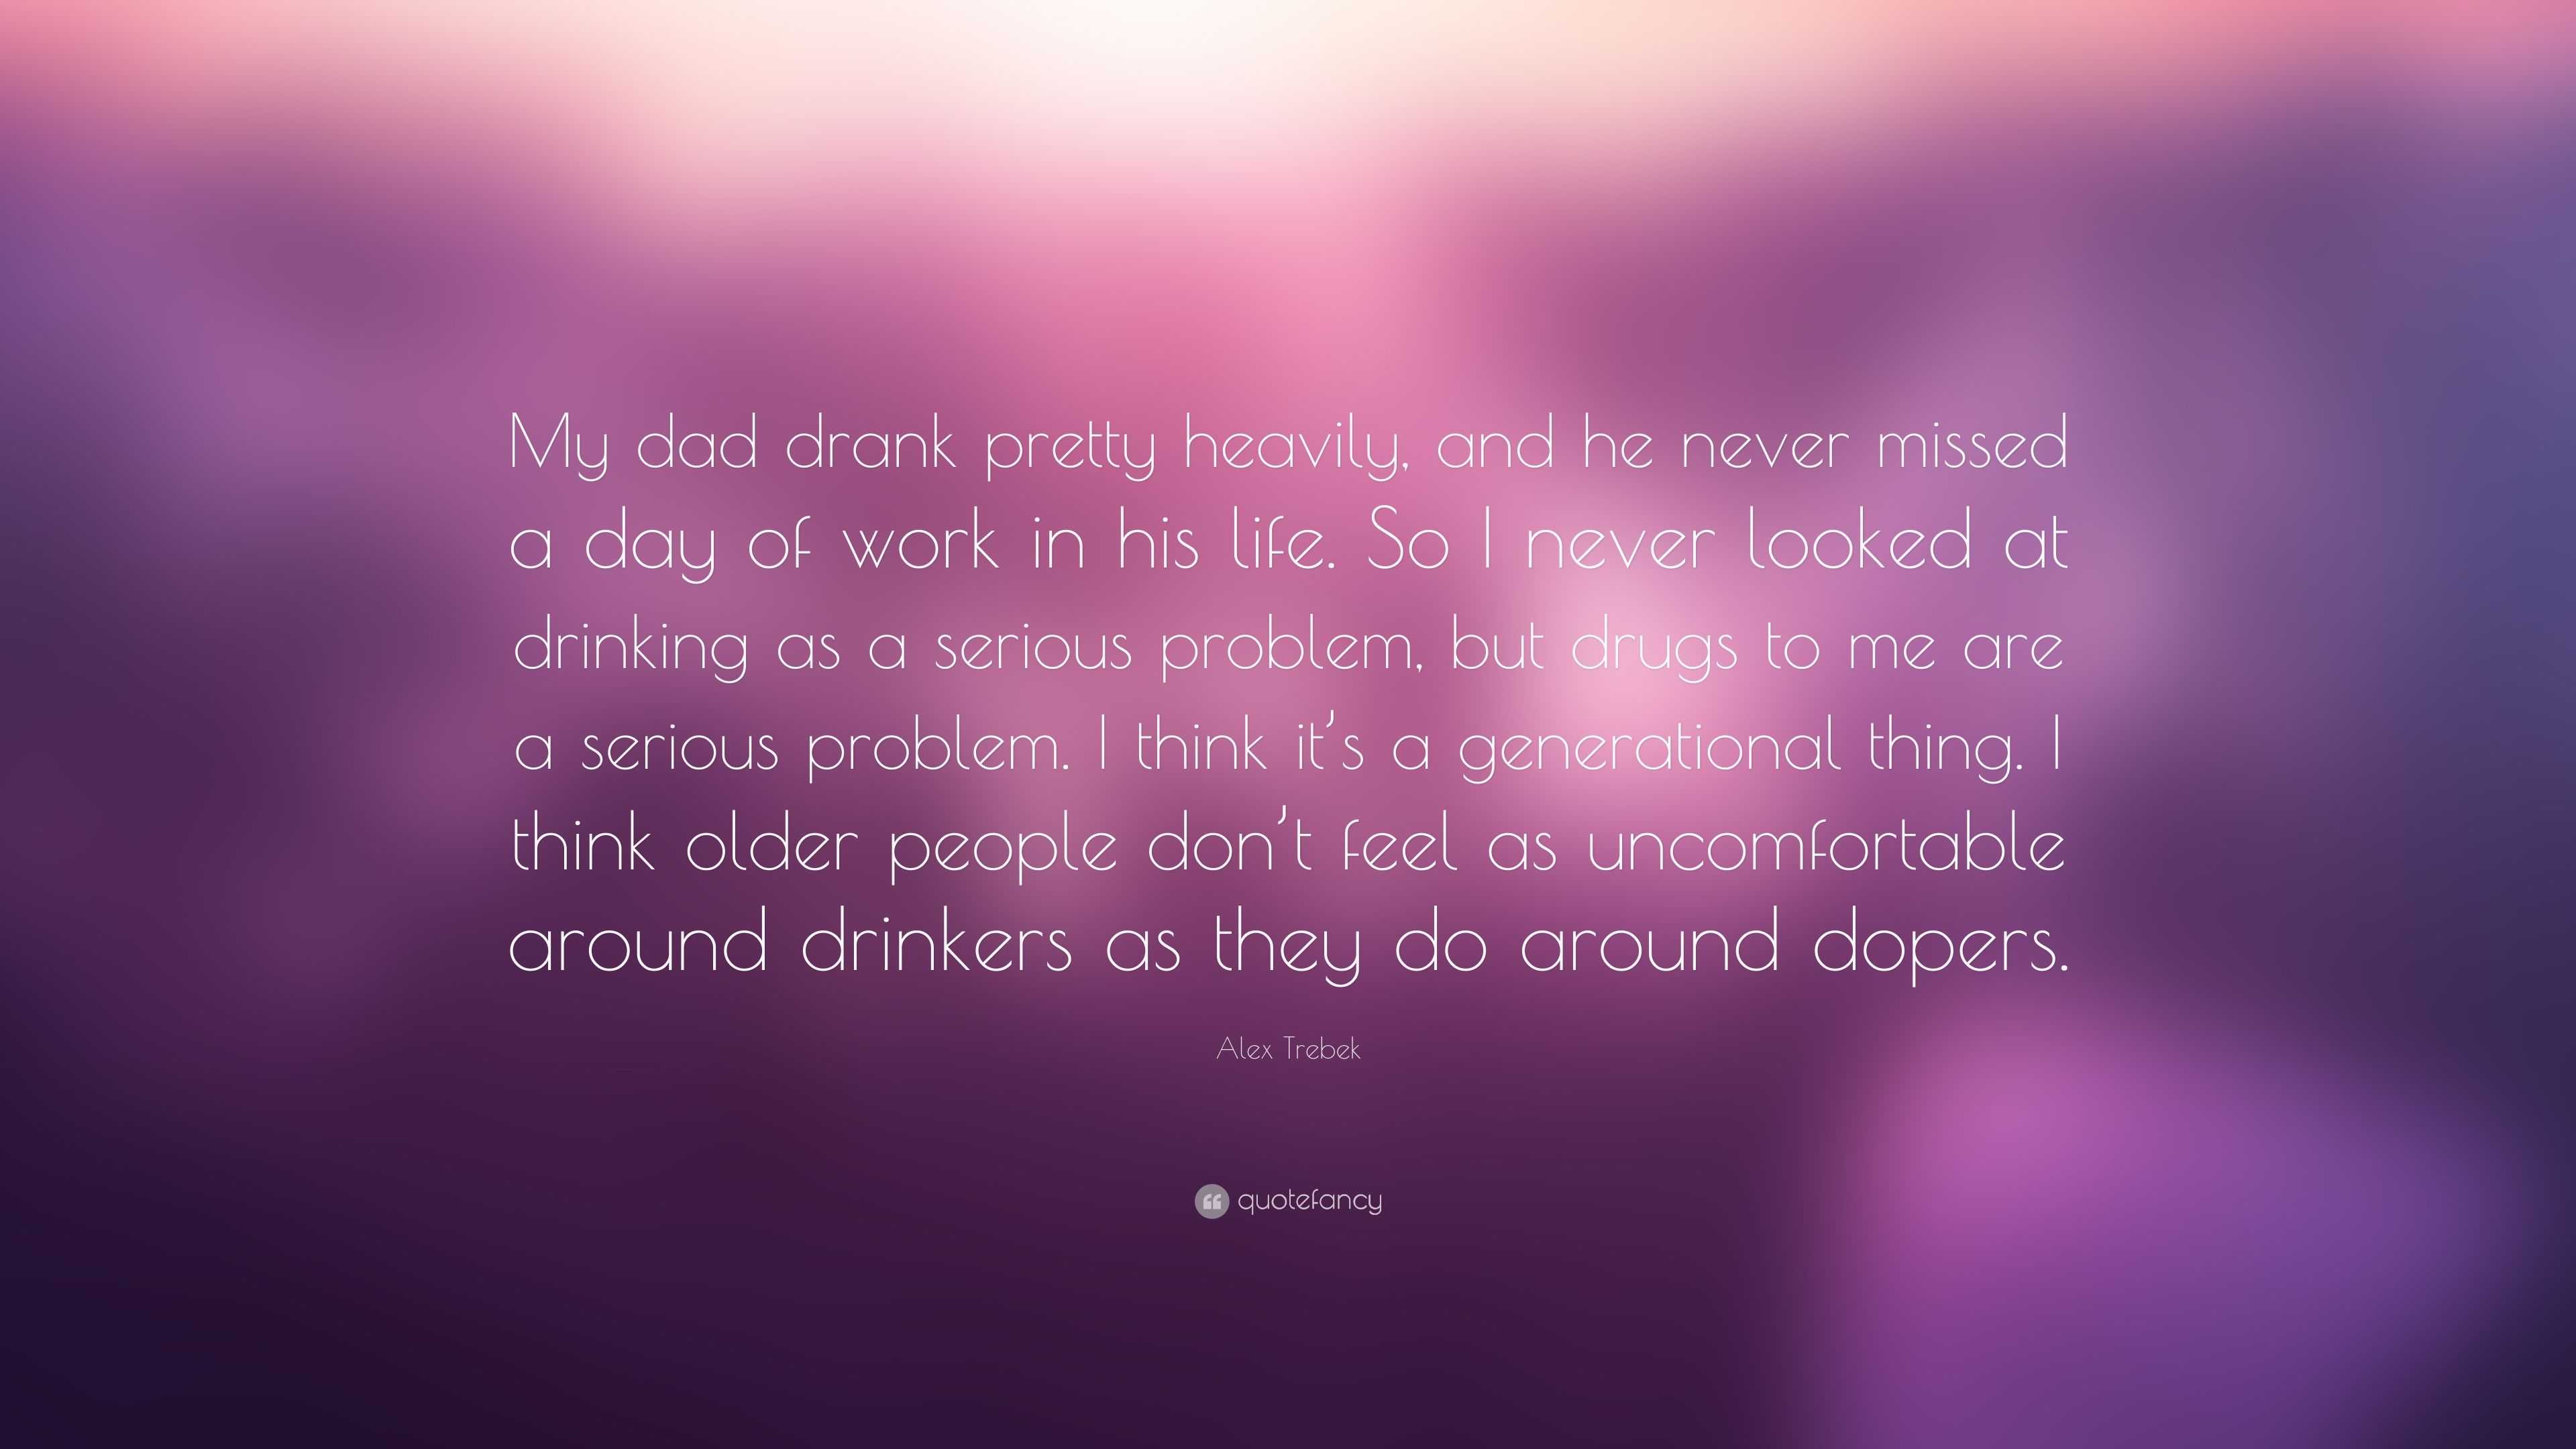 Alex Trebek Quote: “My dad drank pretty heavily, and he never missed a ...